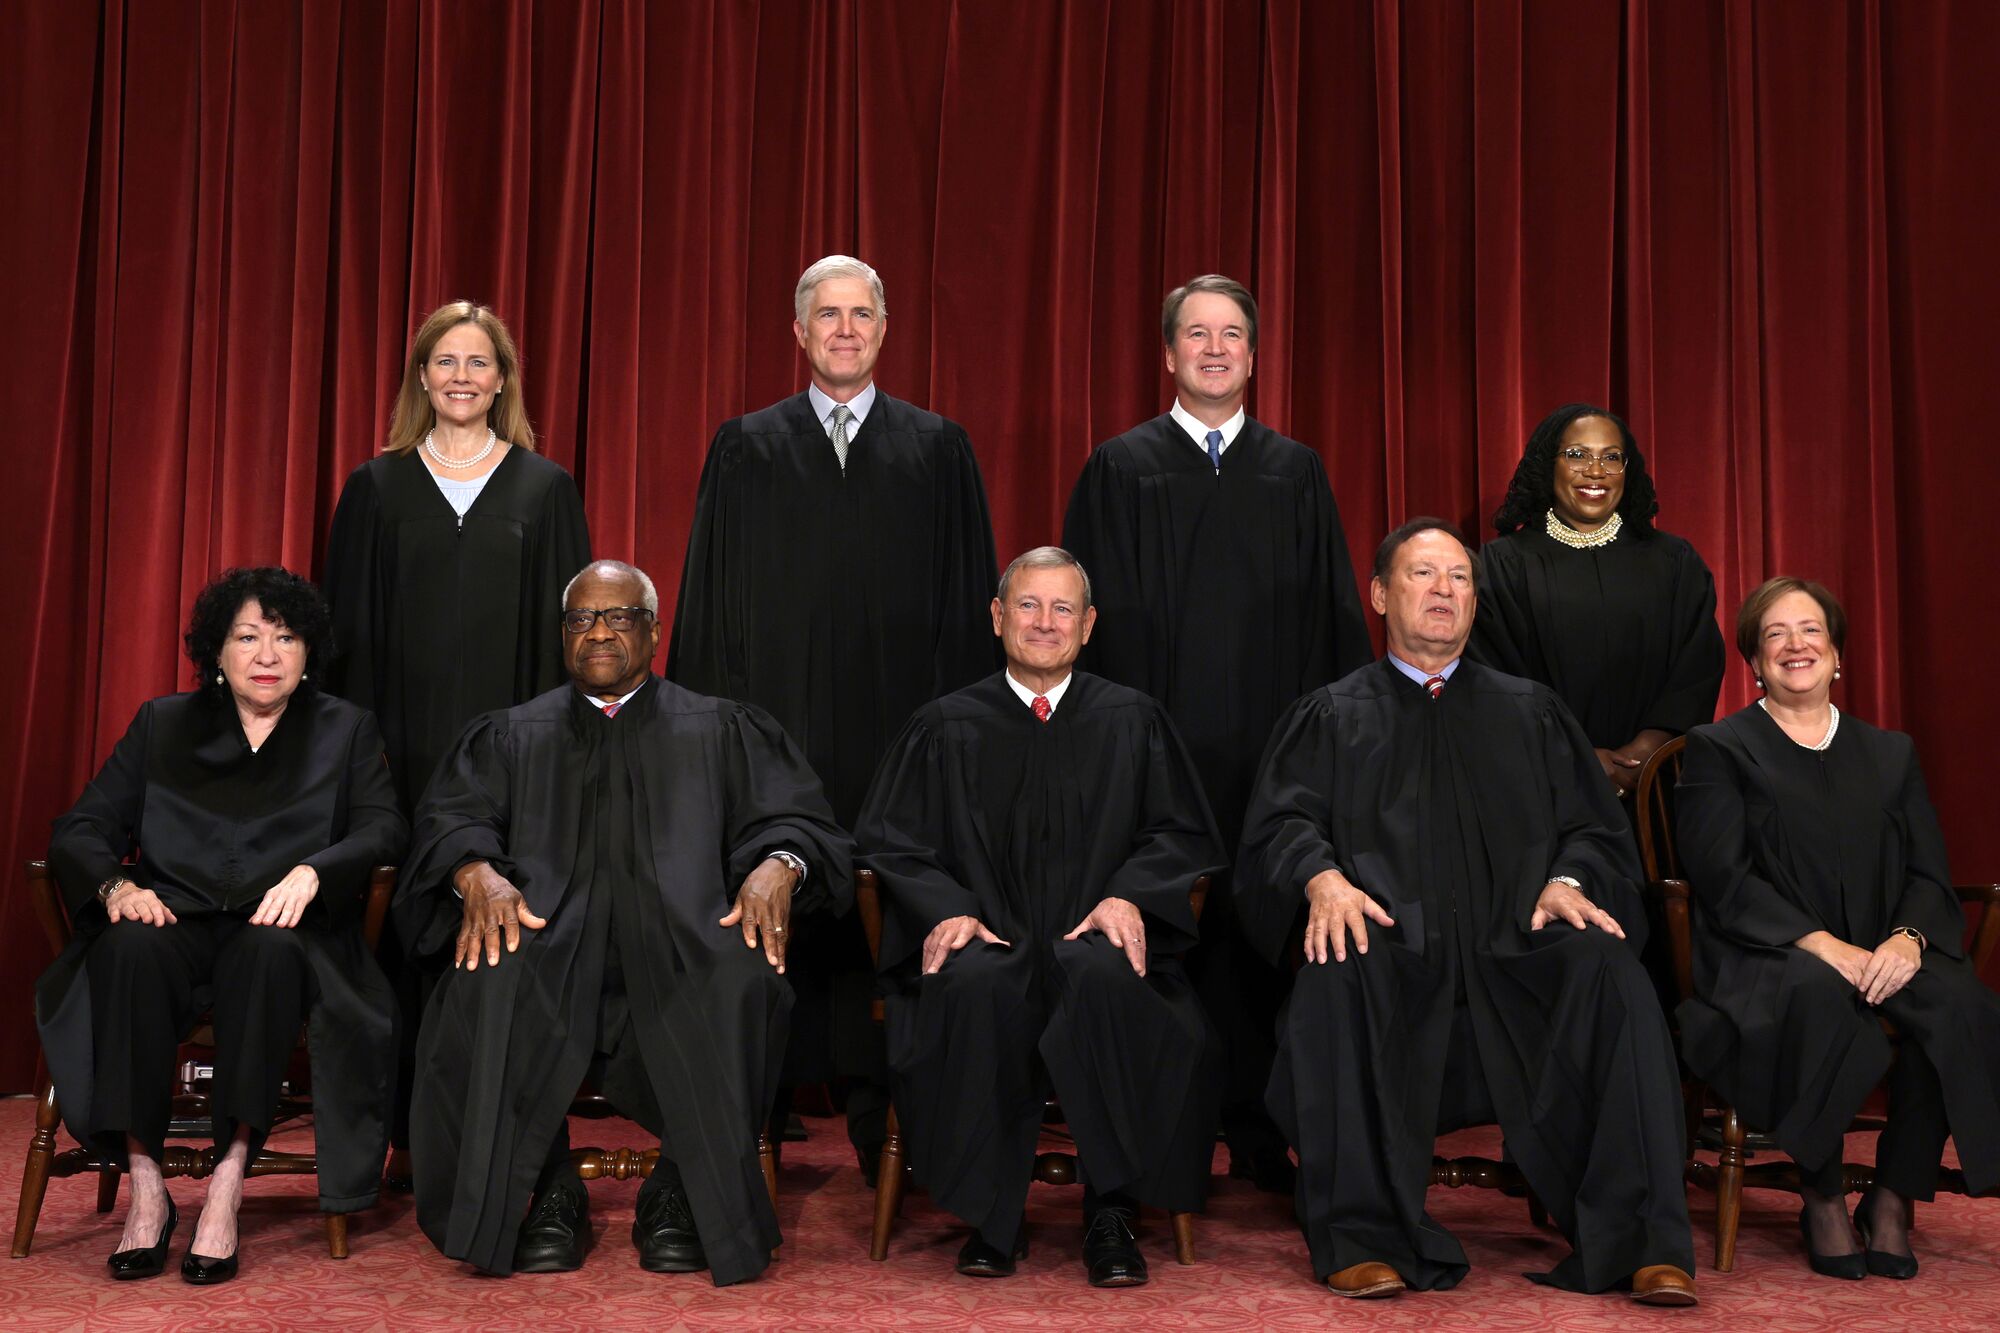 United States Supreme Court (front row L-R) Associate Justice Sonia Sotomayor, Associate Justice Clarence Thomas, Chief Justice of the United States John Roberts, Associate Justice Samuel Alito, and Associate Justice Elena Kagan, (back row L-R) Associate Justice Amy Coney Barrett, Associate Justice Neil Gorsuch, Associate Justice Brett Kavanaugh and Associate Justice Ketanji Brown Jackson pose for their official portrait at the East Conference Room of the Supreme Court building on October 7, 2022 in Washington, DC. The Supreme Court has begun a new term after Associate Justice Ketanji Brown Jackson was officially added to the bench in September.